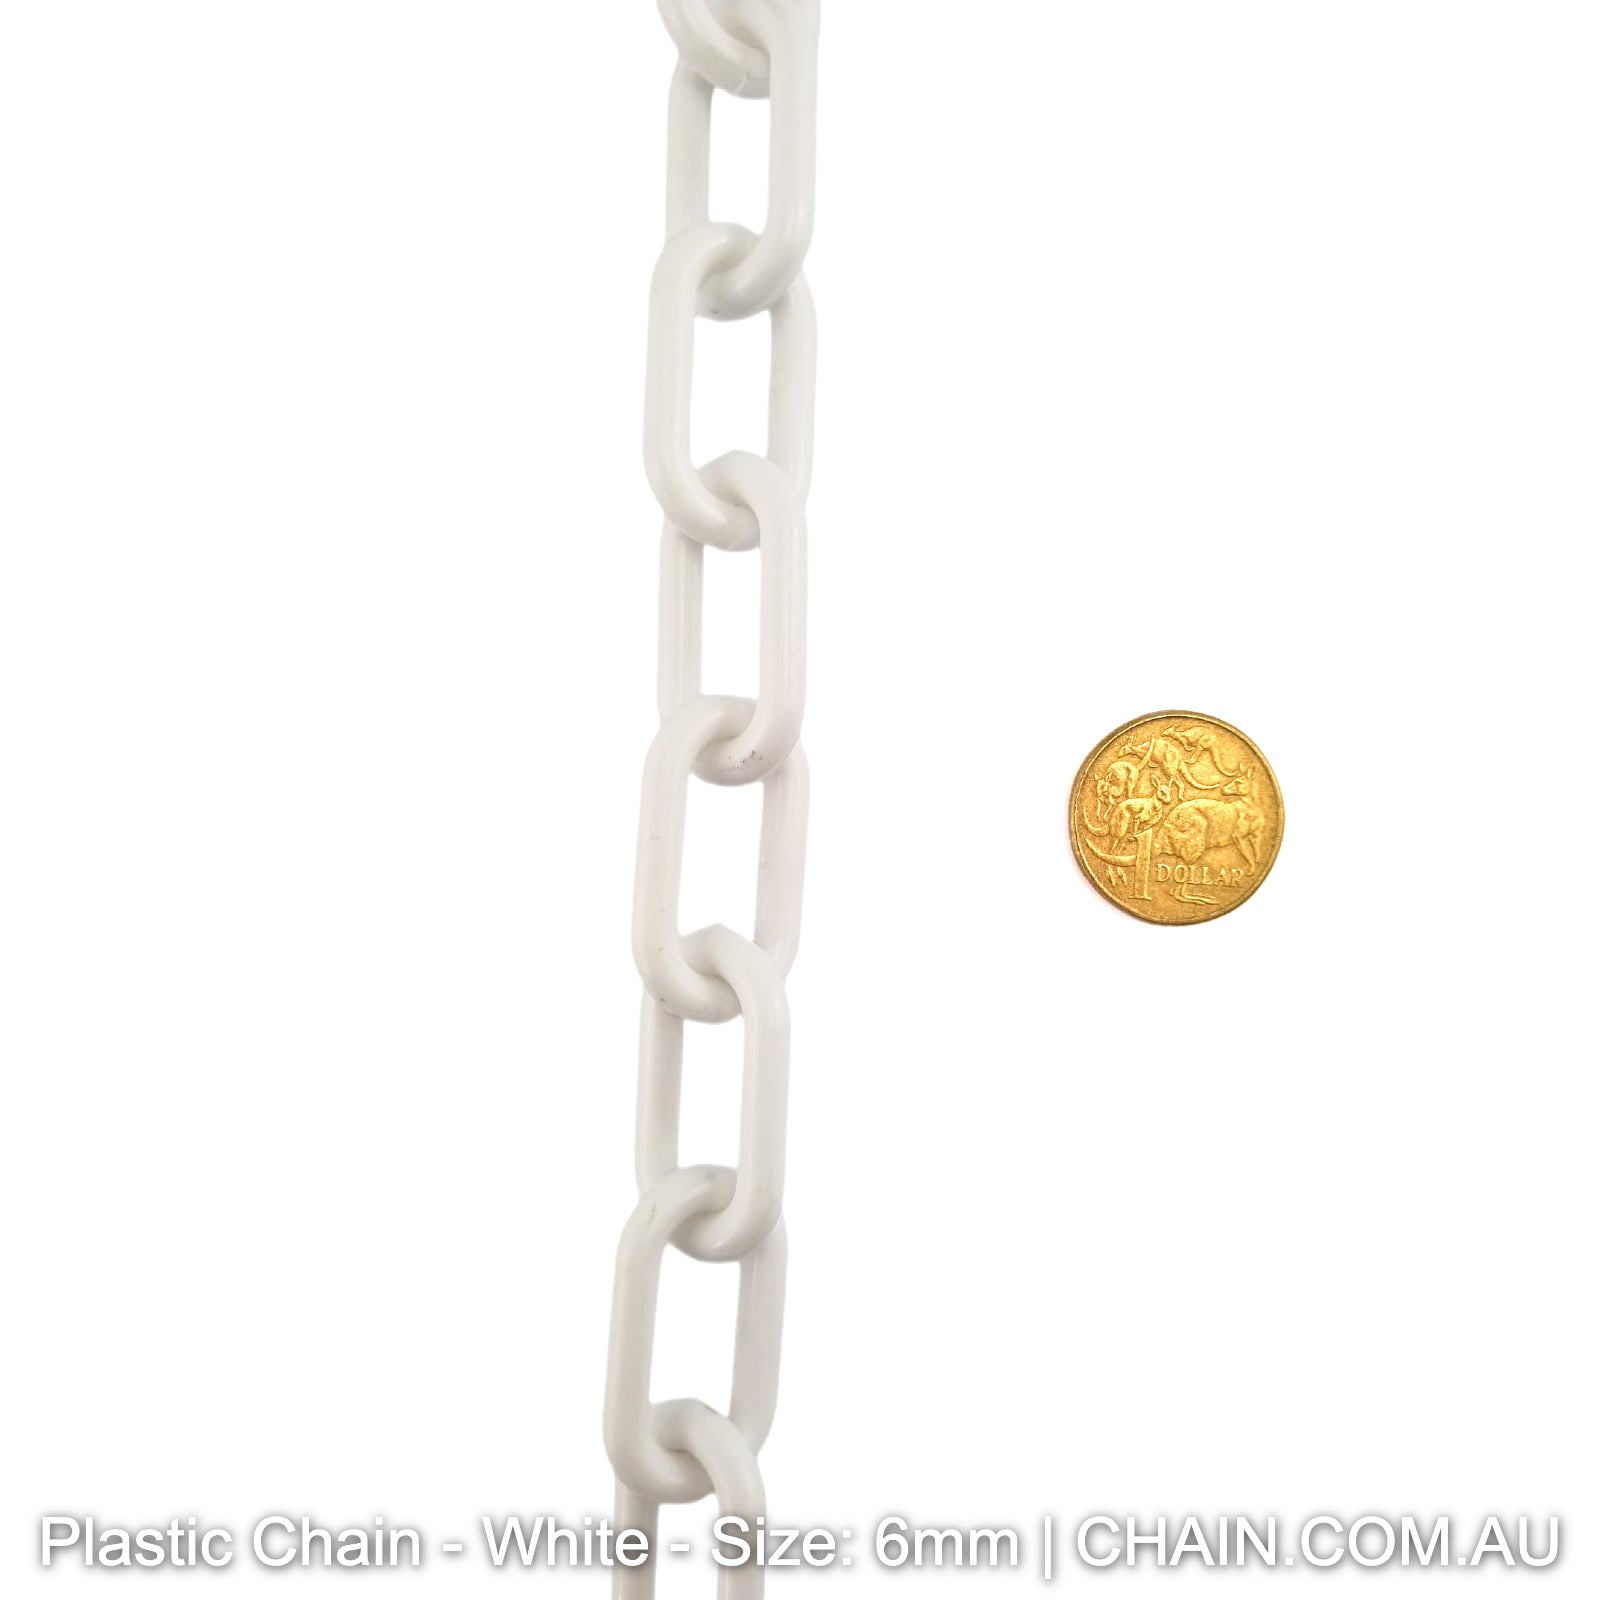 White Plastic Chain, size 6mm. Chain by the metre. Australia wide shipping.